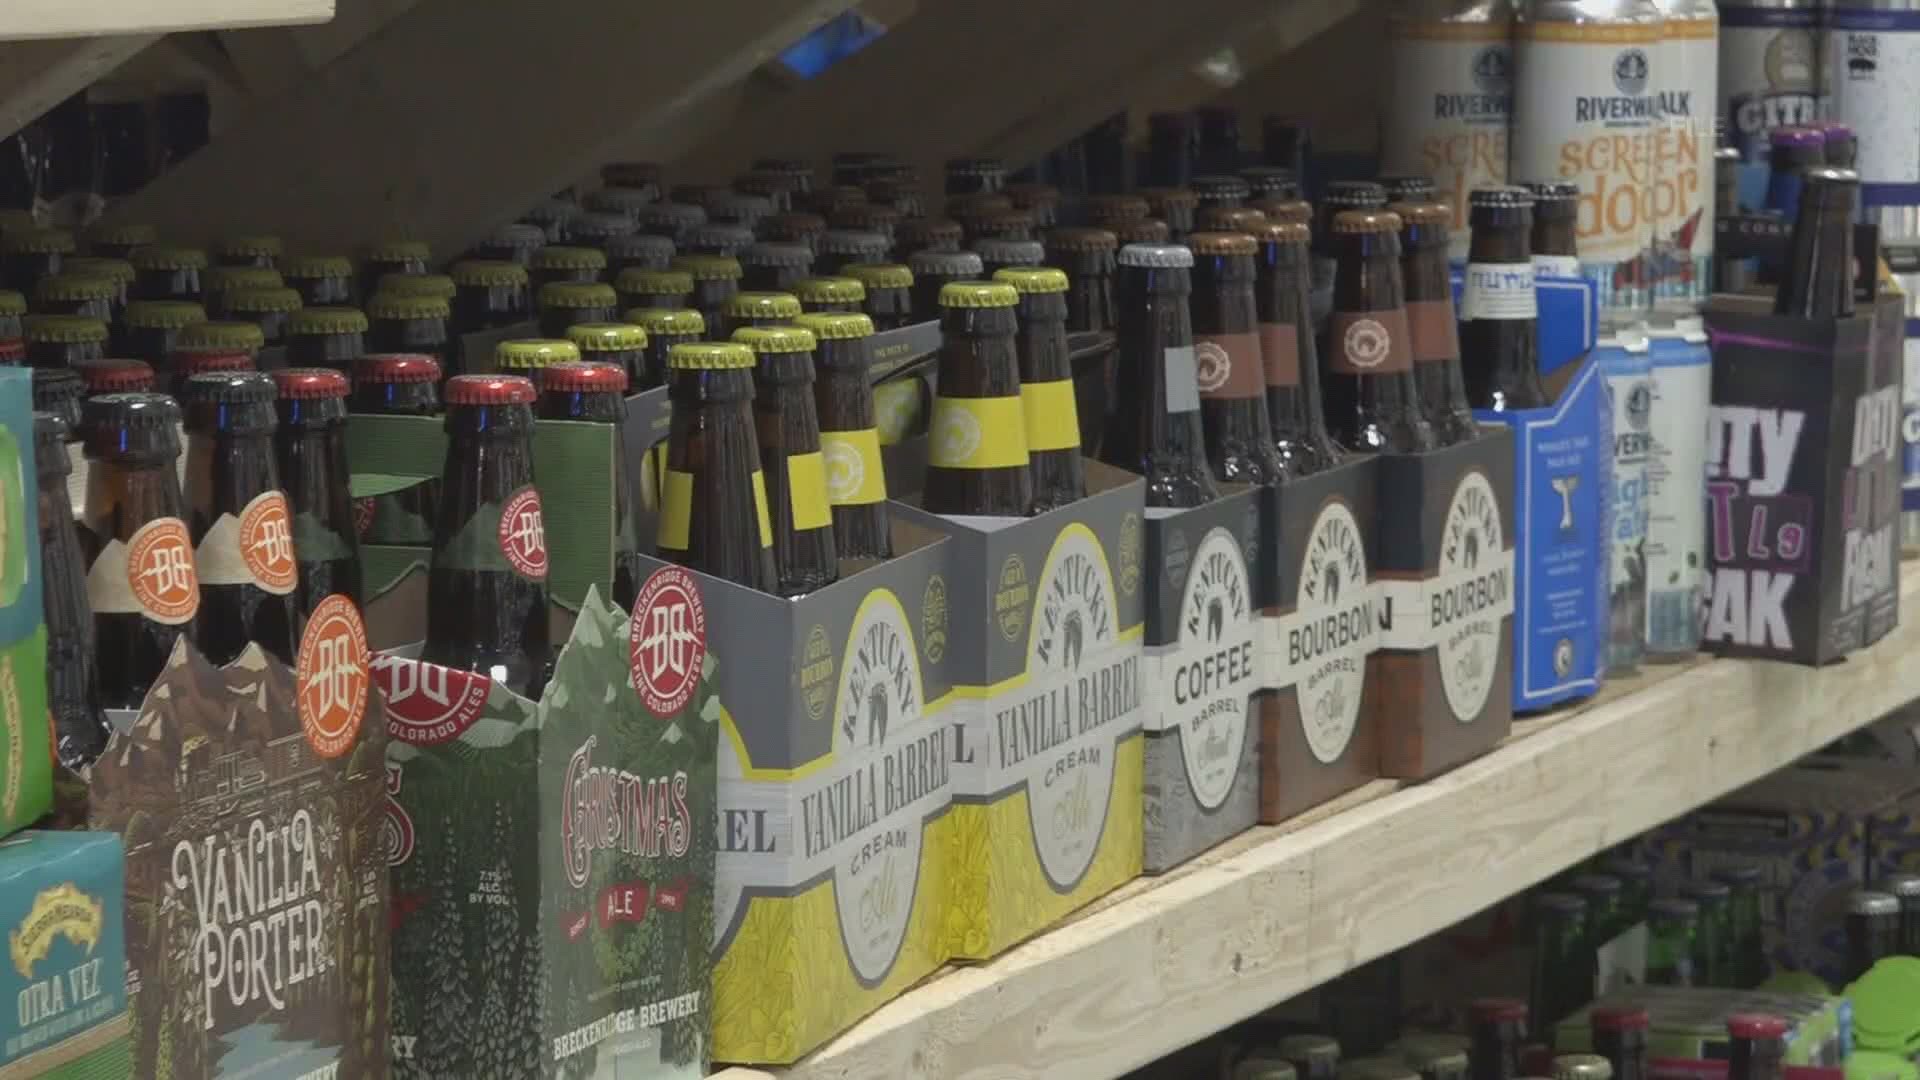 Maine Spirits has seen an increase in sales since the pandemic began.